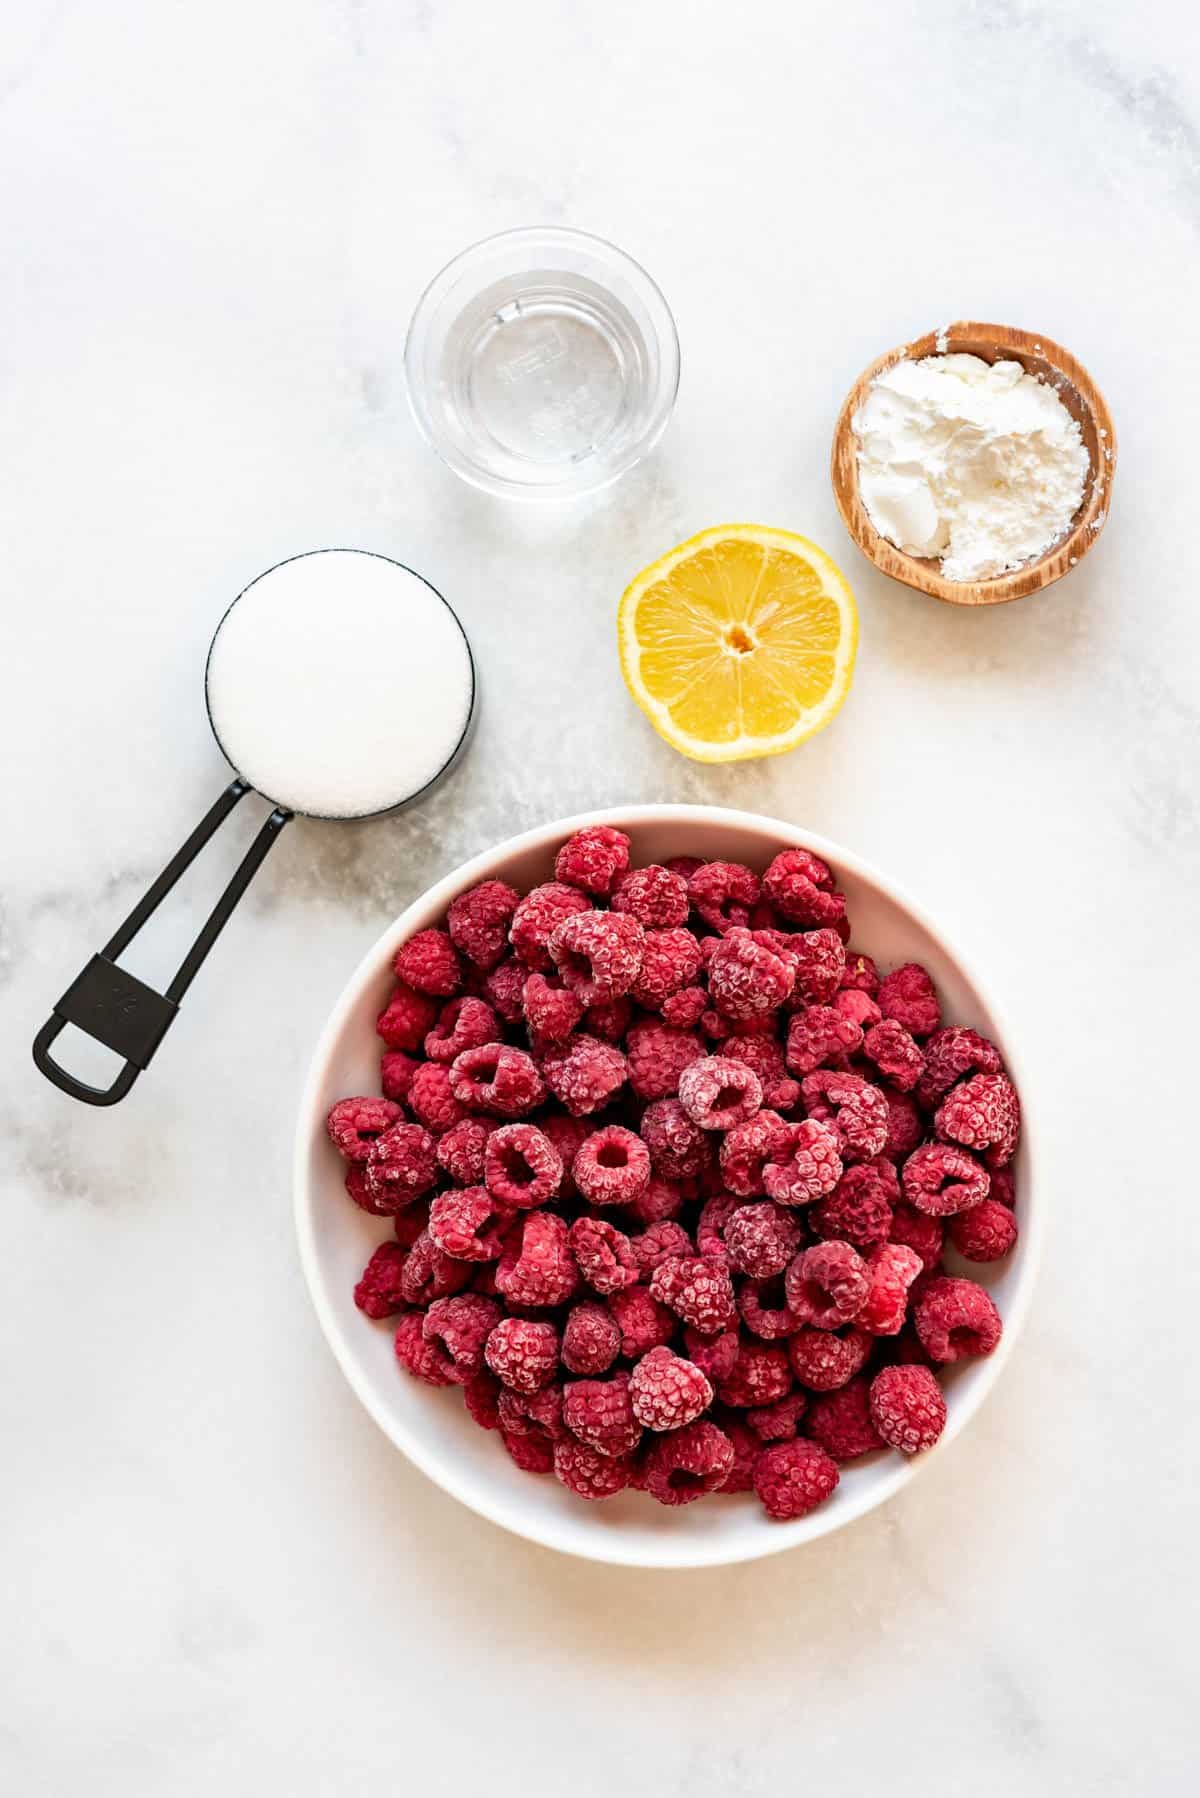 Ingredients for raspberry cake filling.